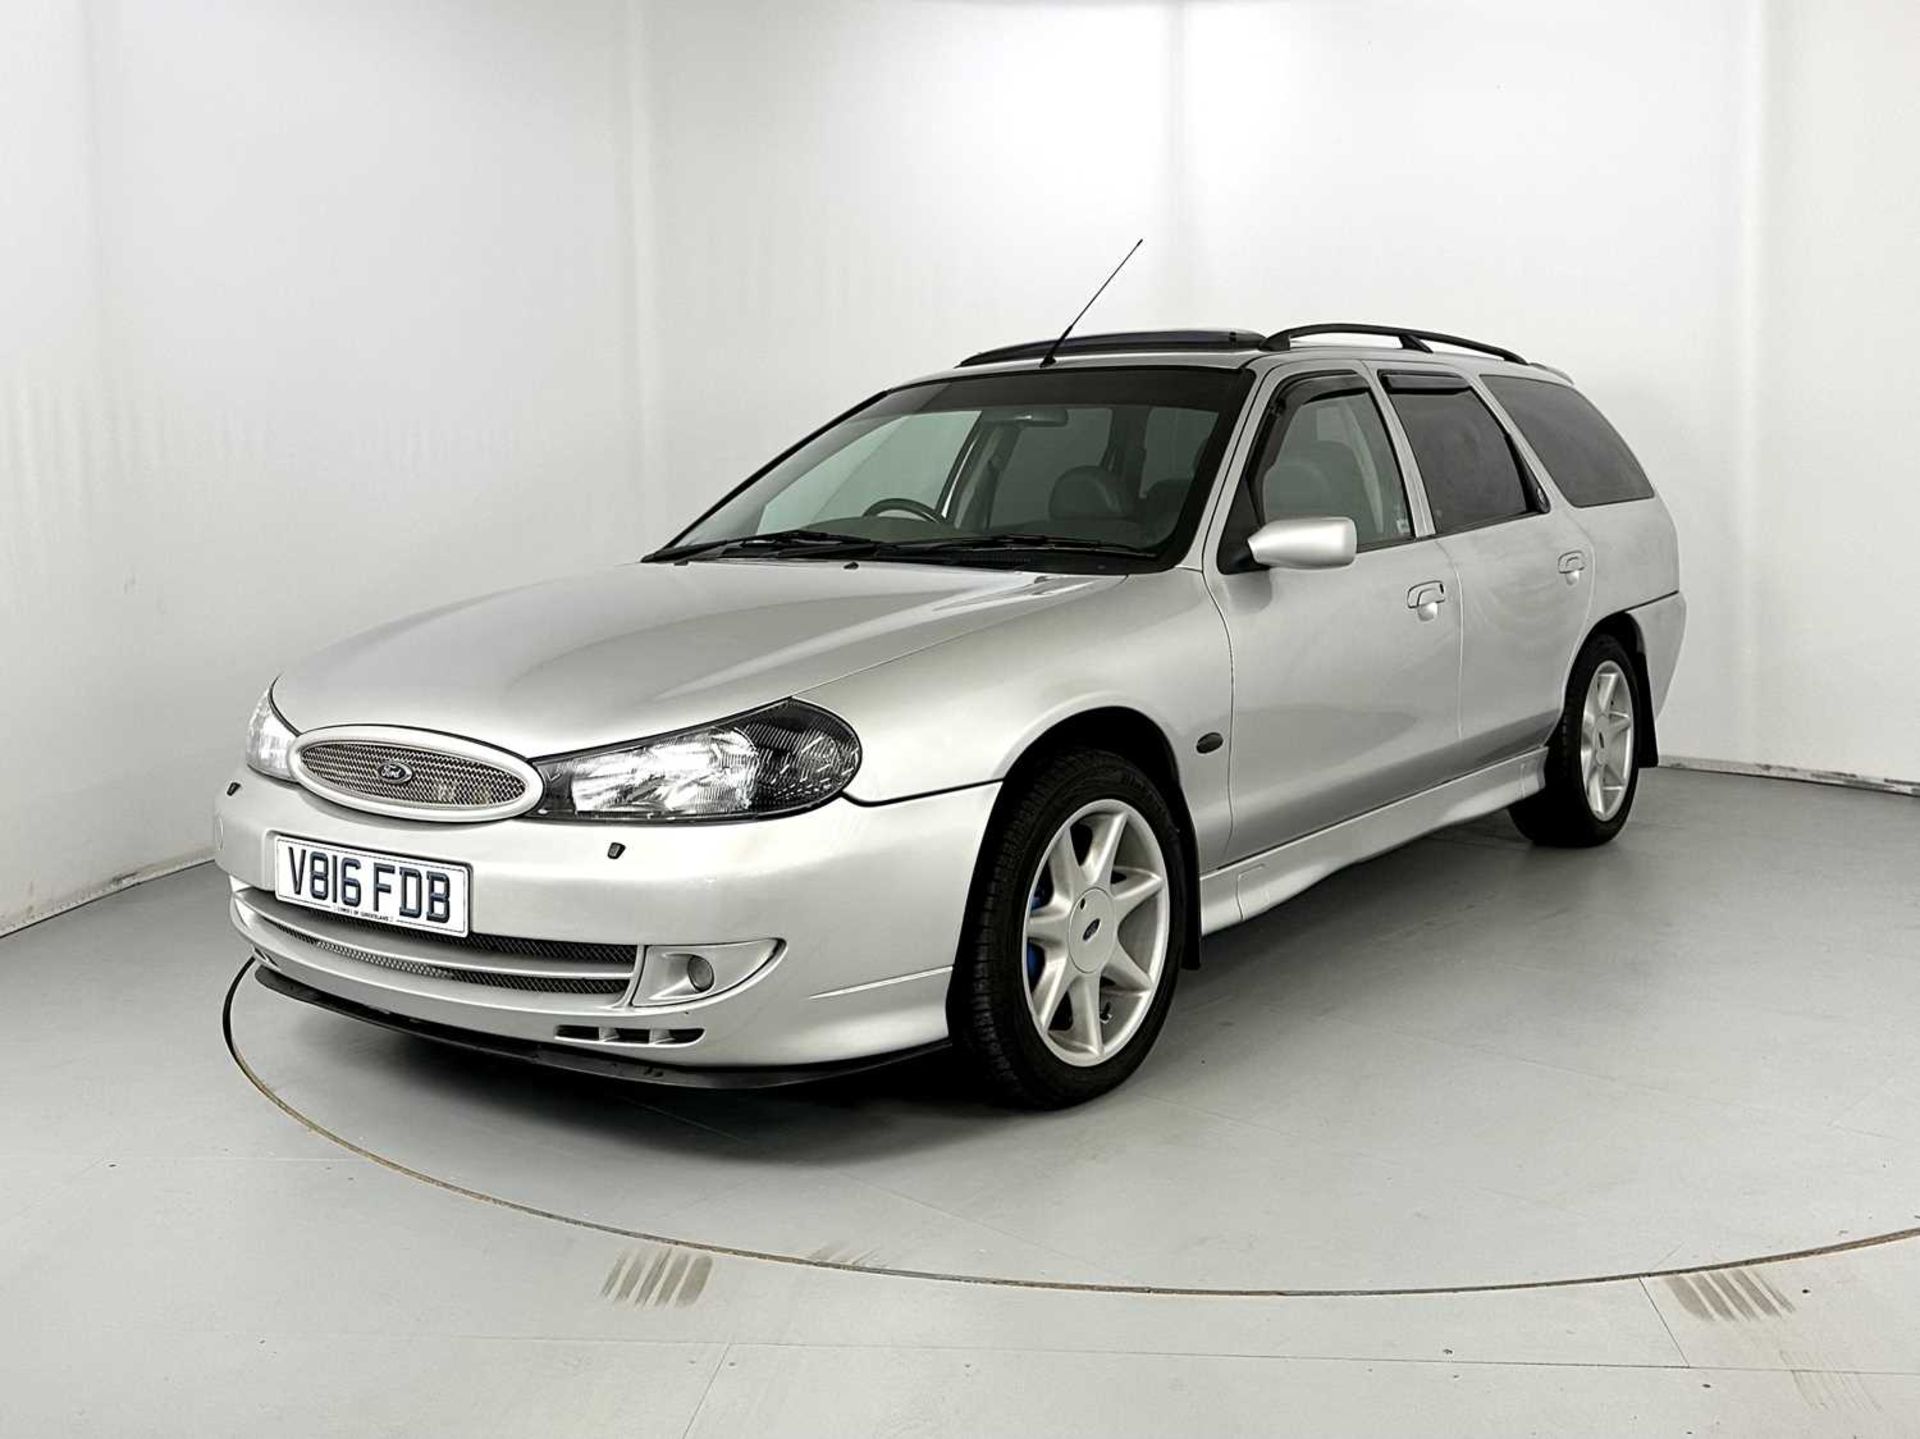 1999 Ford Mondeo Ghia X - Image 3 of 35